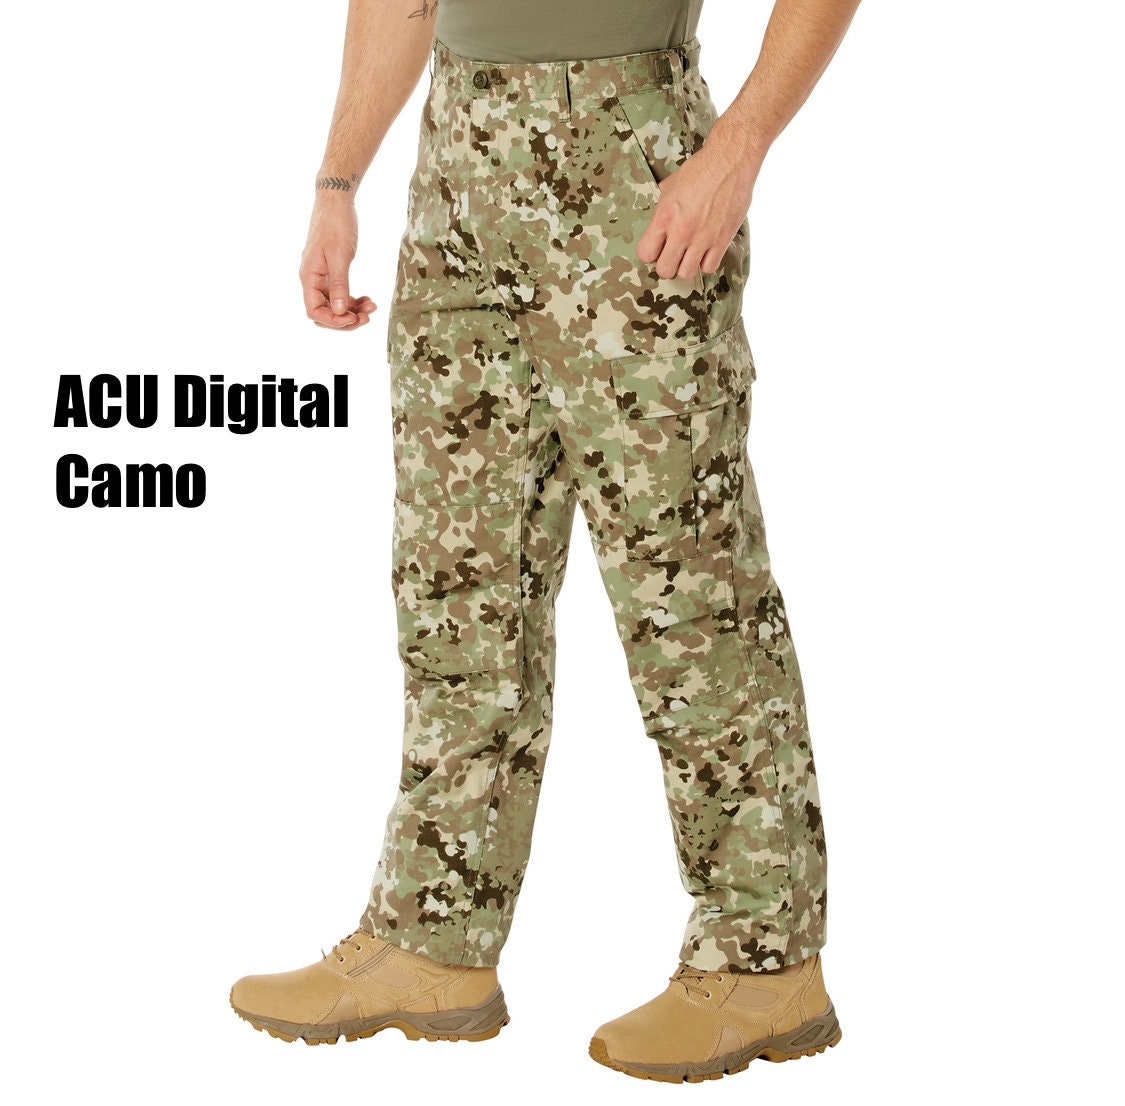 Tactical Clothing Then and Now - Camo365